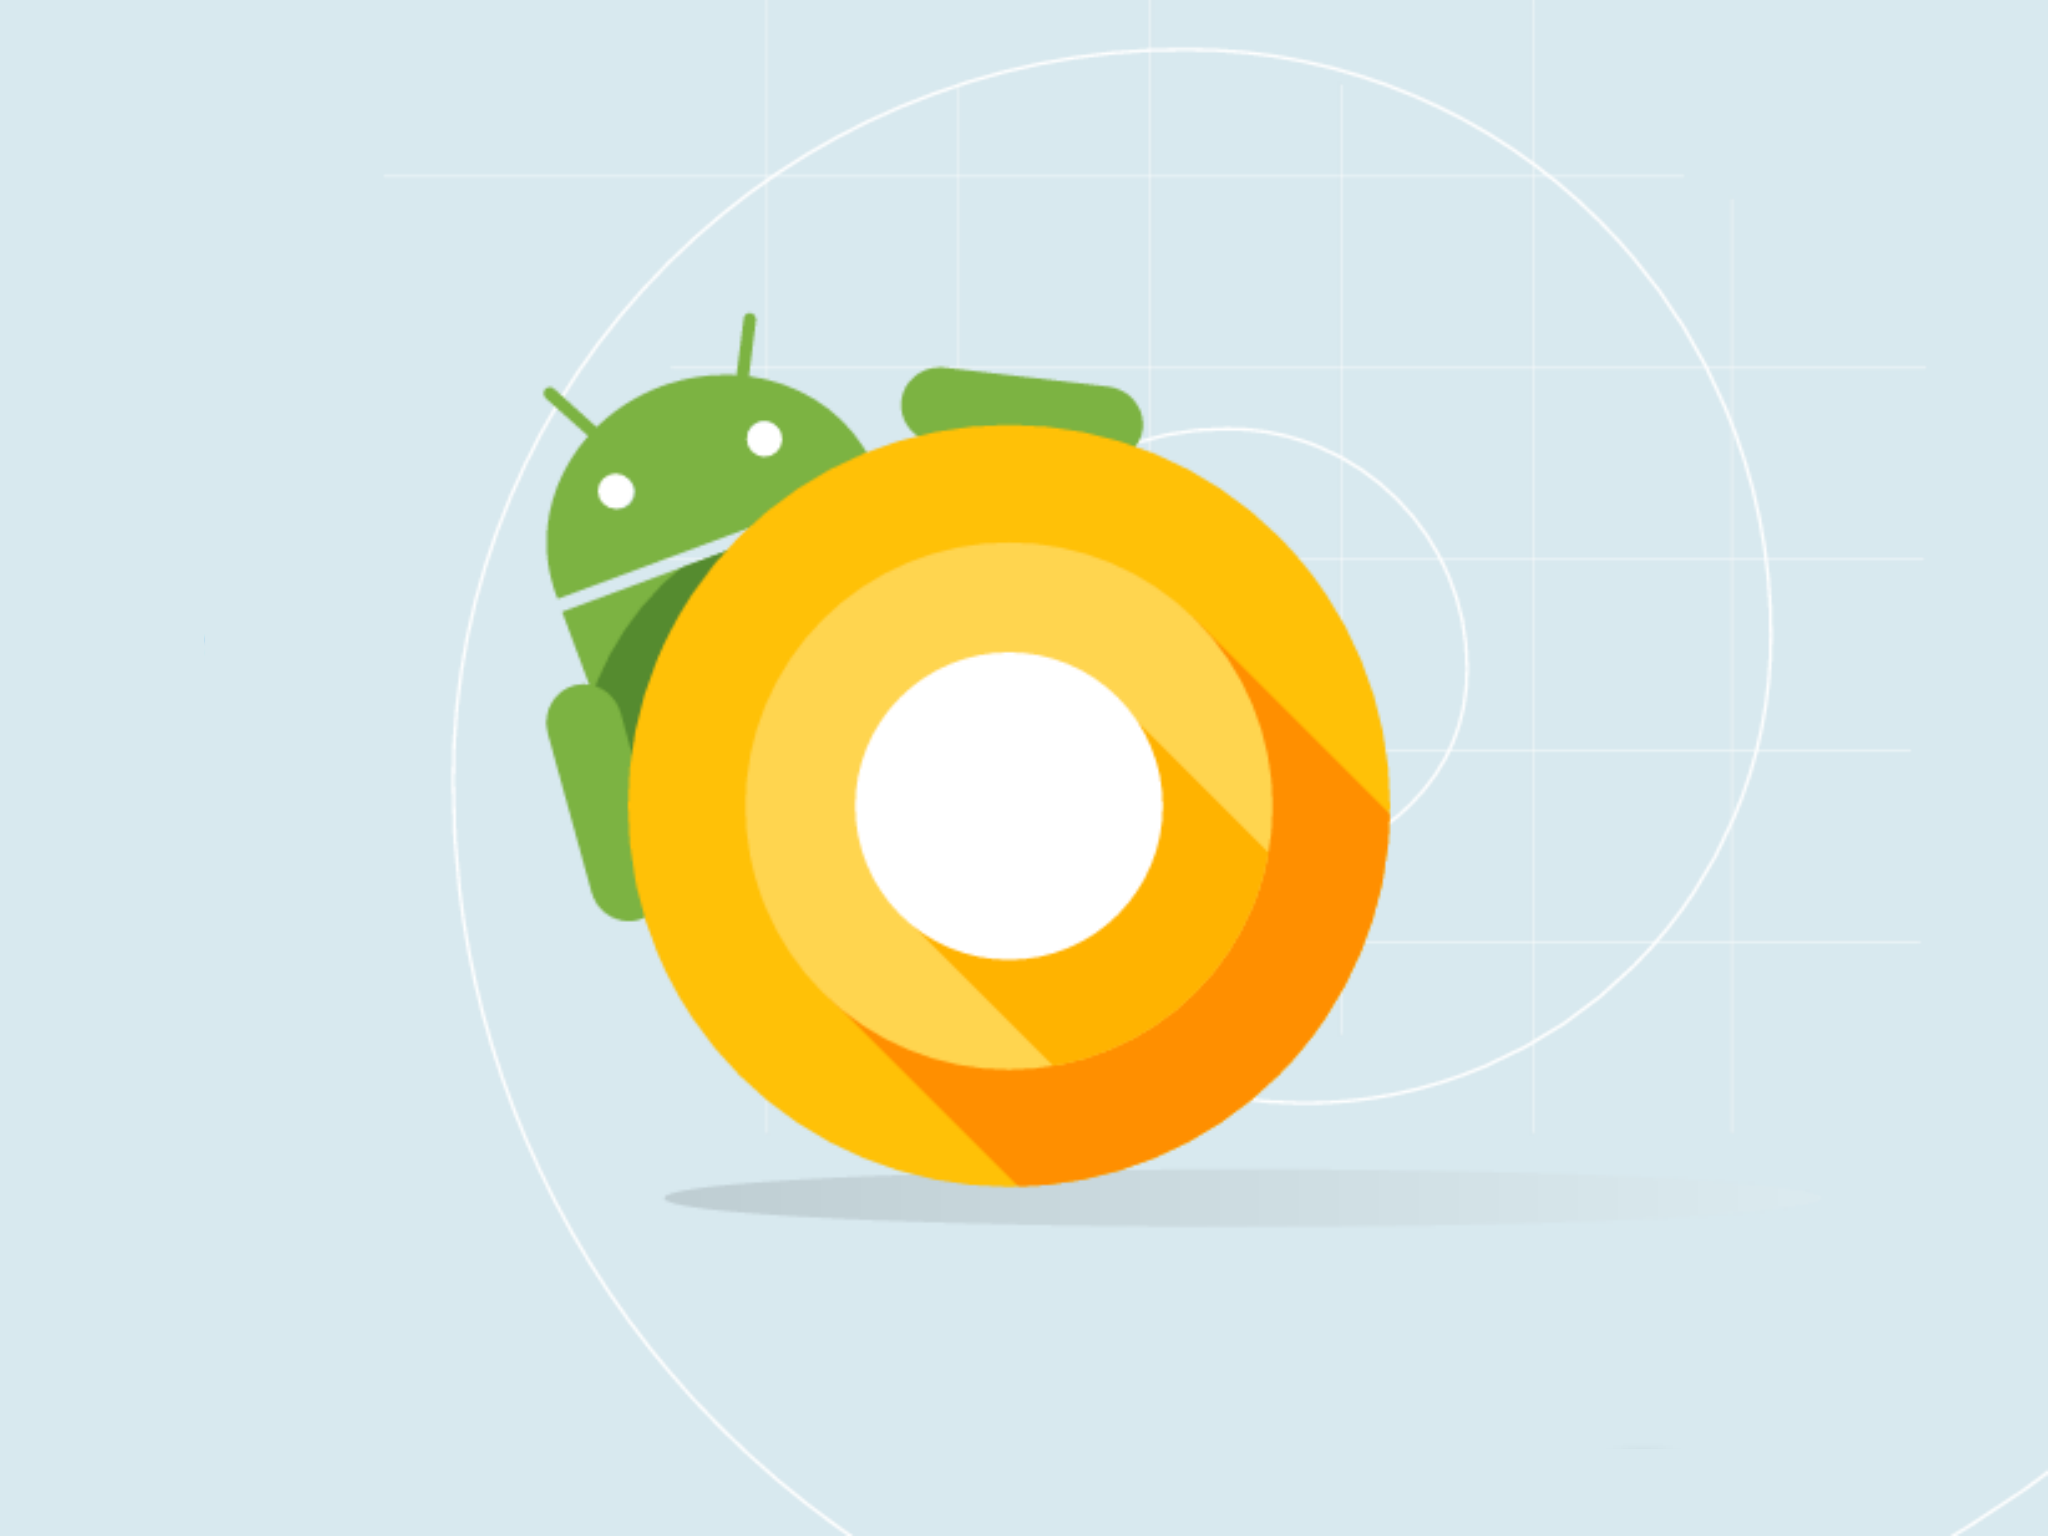 technology news,national news,international news,Android O Features, Five best Features of Android O,Features of Android O,Android O,Android O specification, 5 best Features in Android O,top Five things in Android O